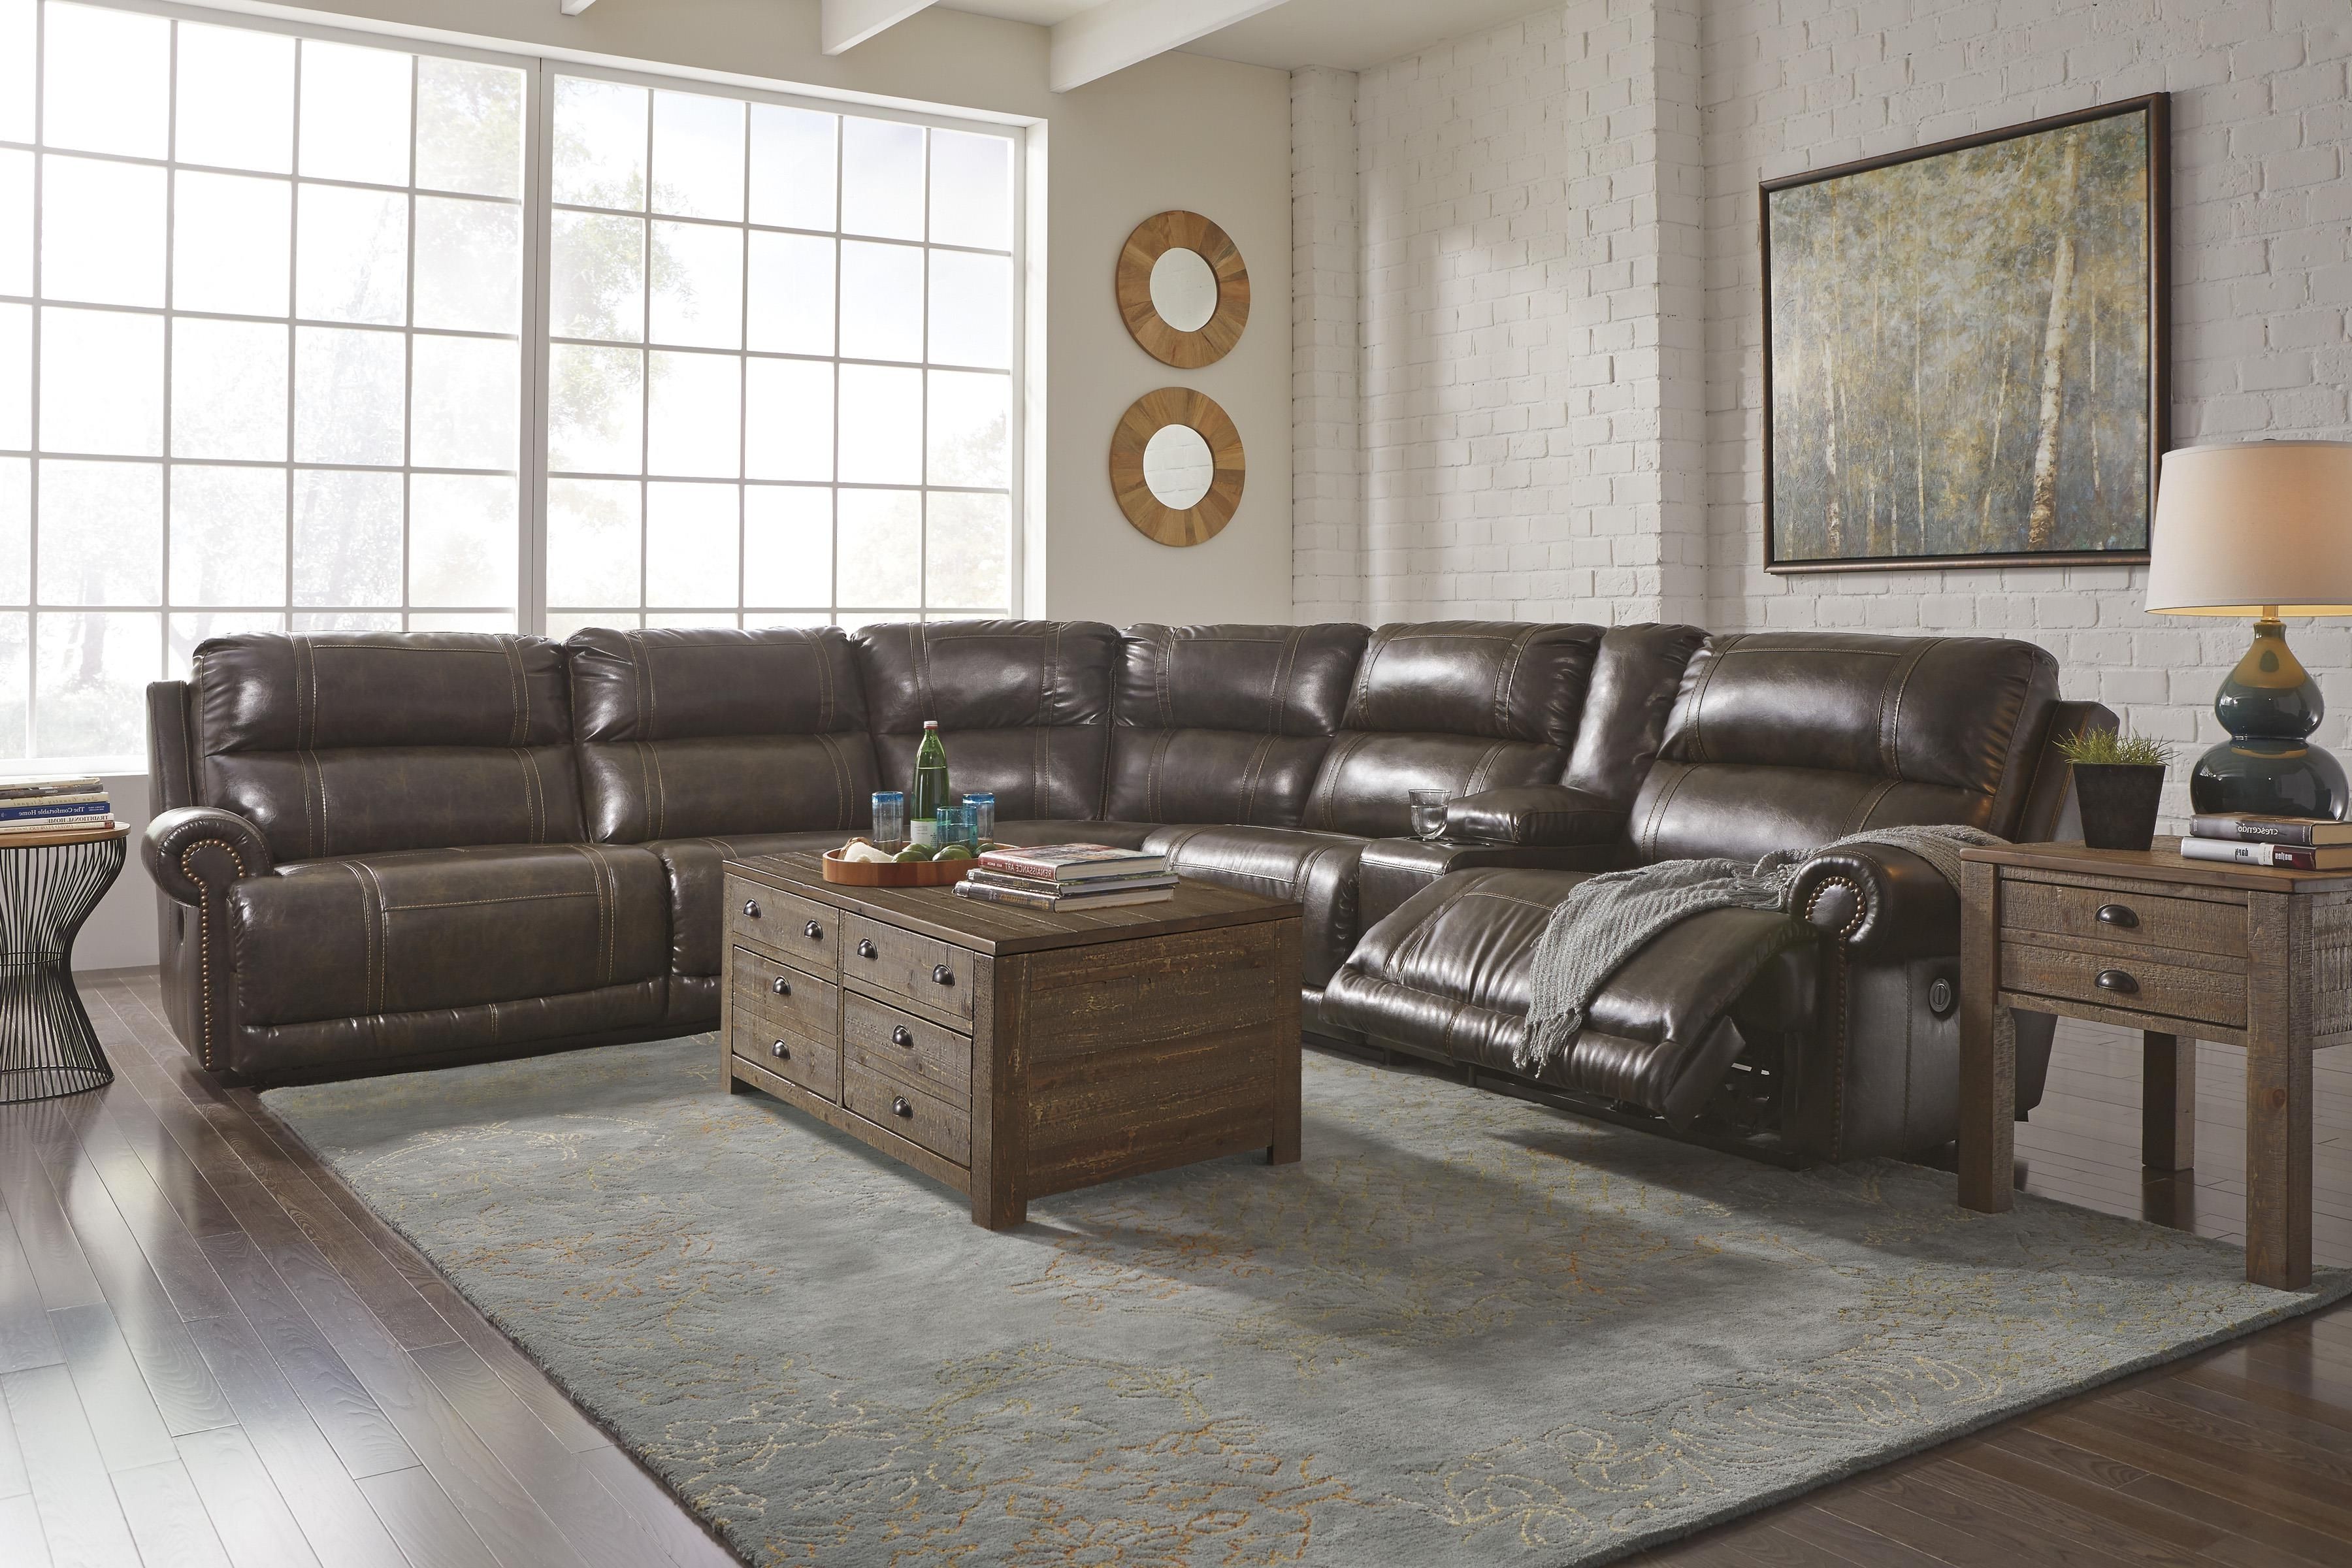 6 Piece Power Reclining Sectional With Storage Console & Armless Inside Trendy 6 Piece Leather Sectional Sofas (View 5 of 15)